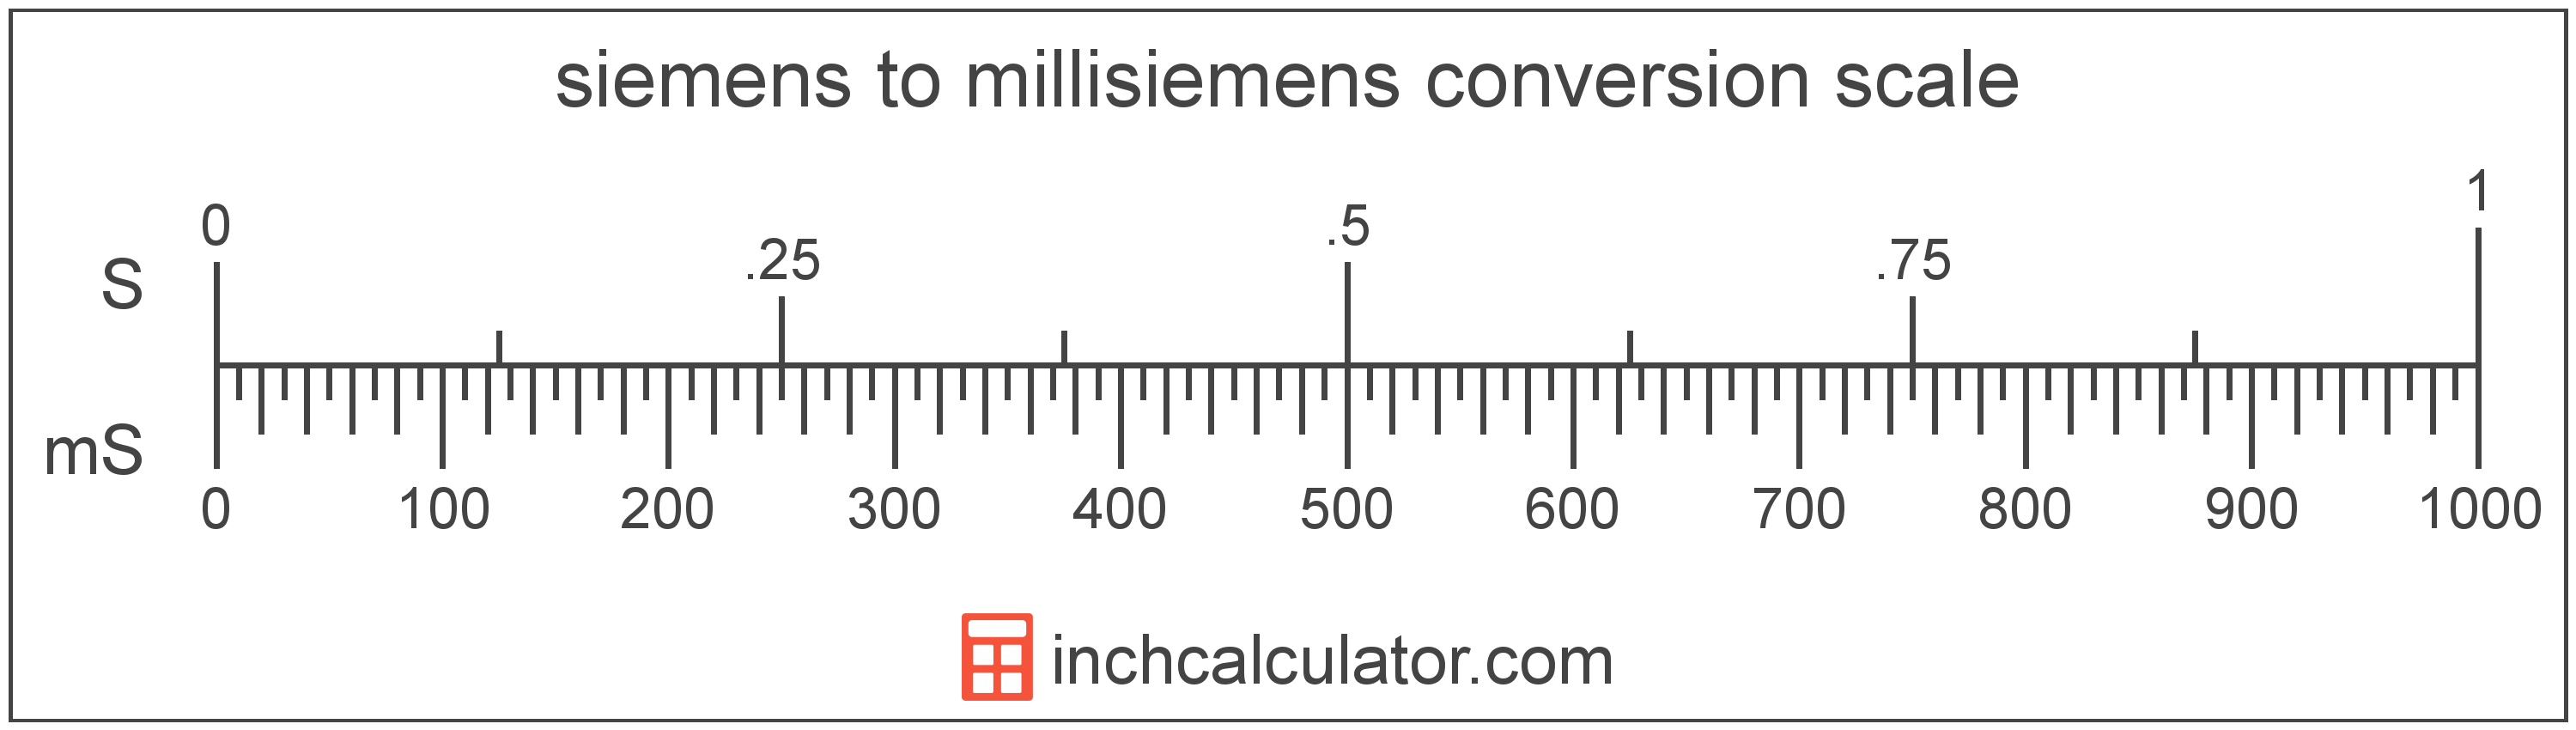 conversion scale showing millisiemens and equivalent siemens electrical conductance values